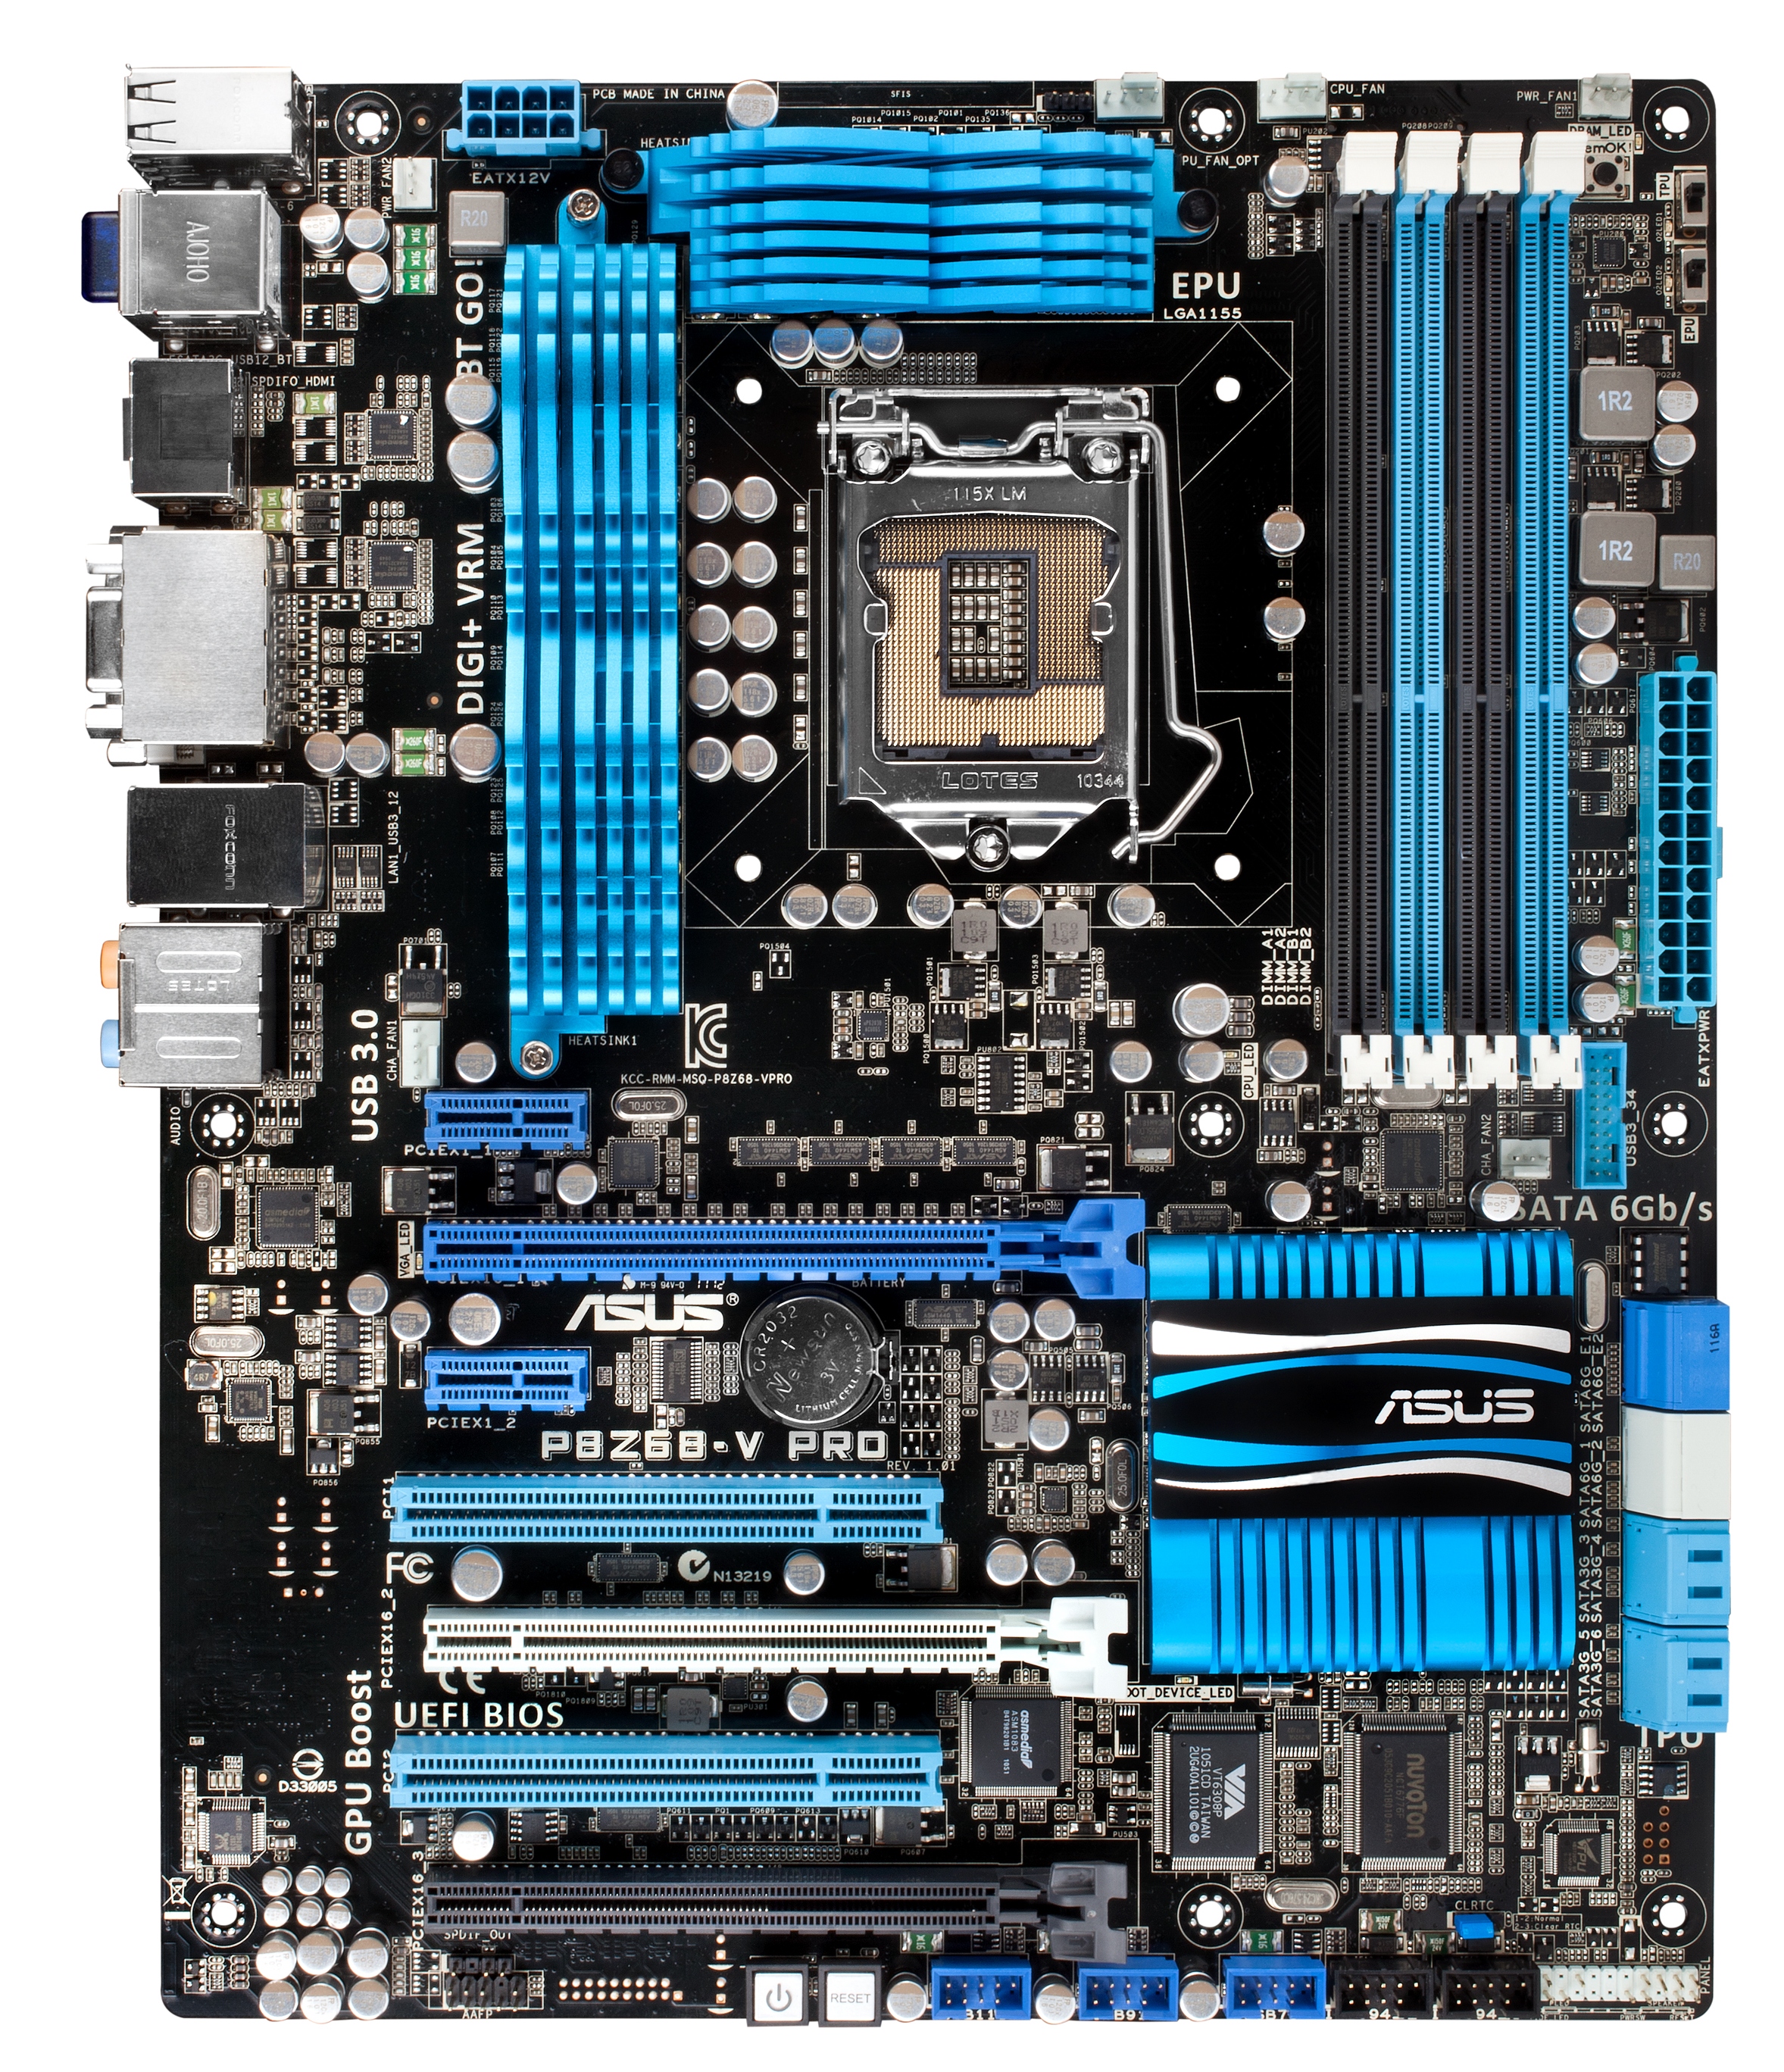 ASUS P8Z68-V PRO Review: Our First Z68 Motherboard